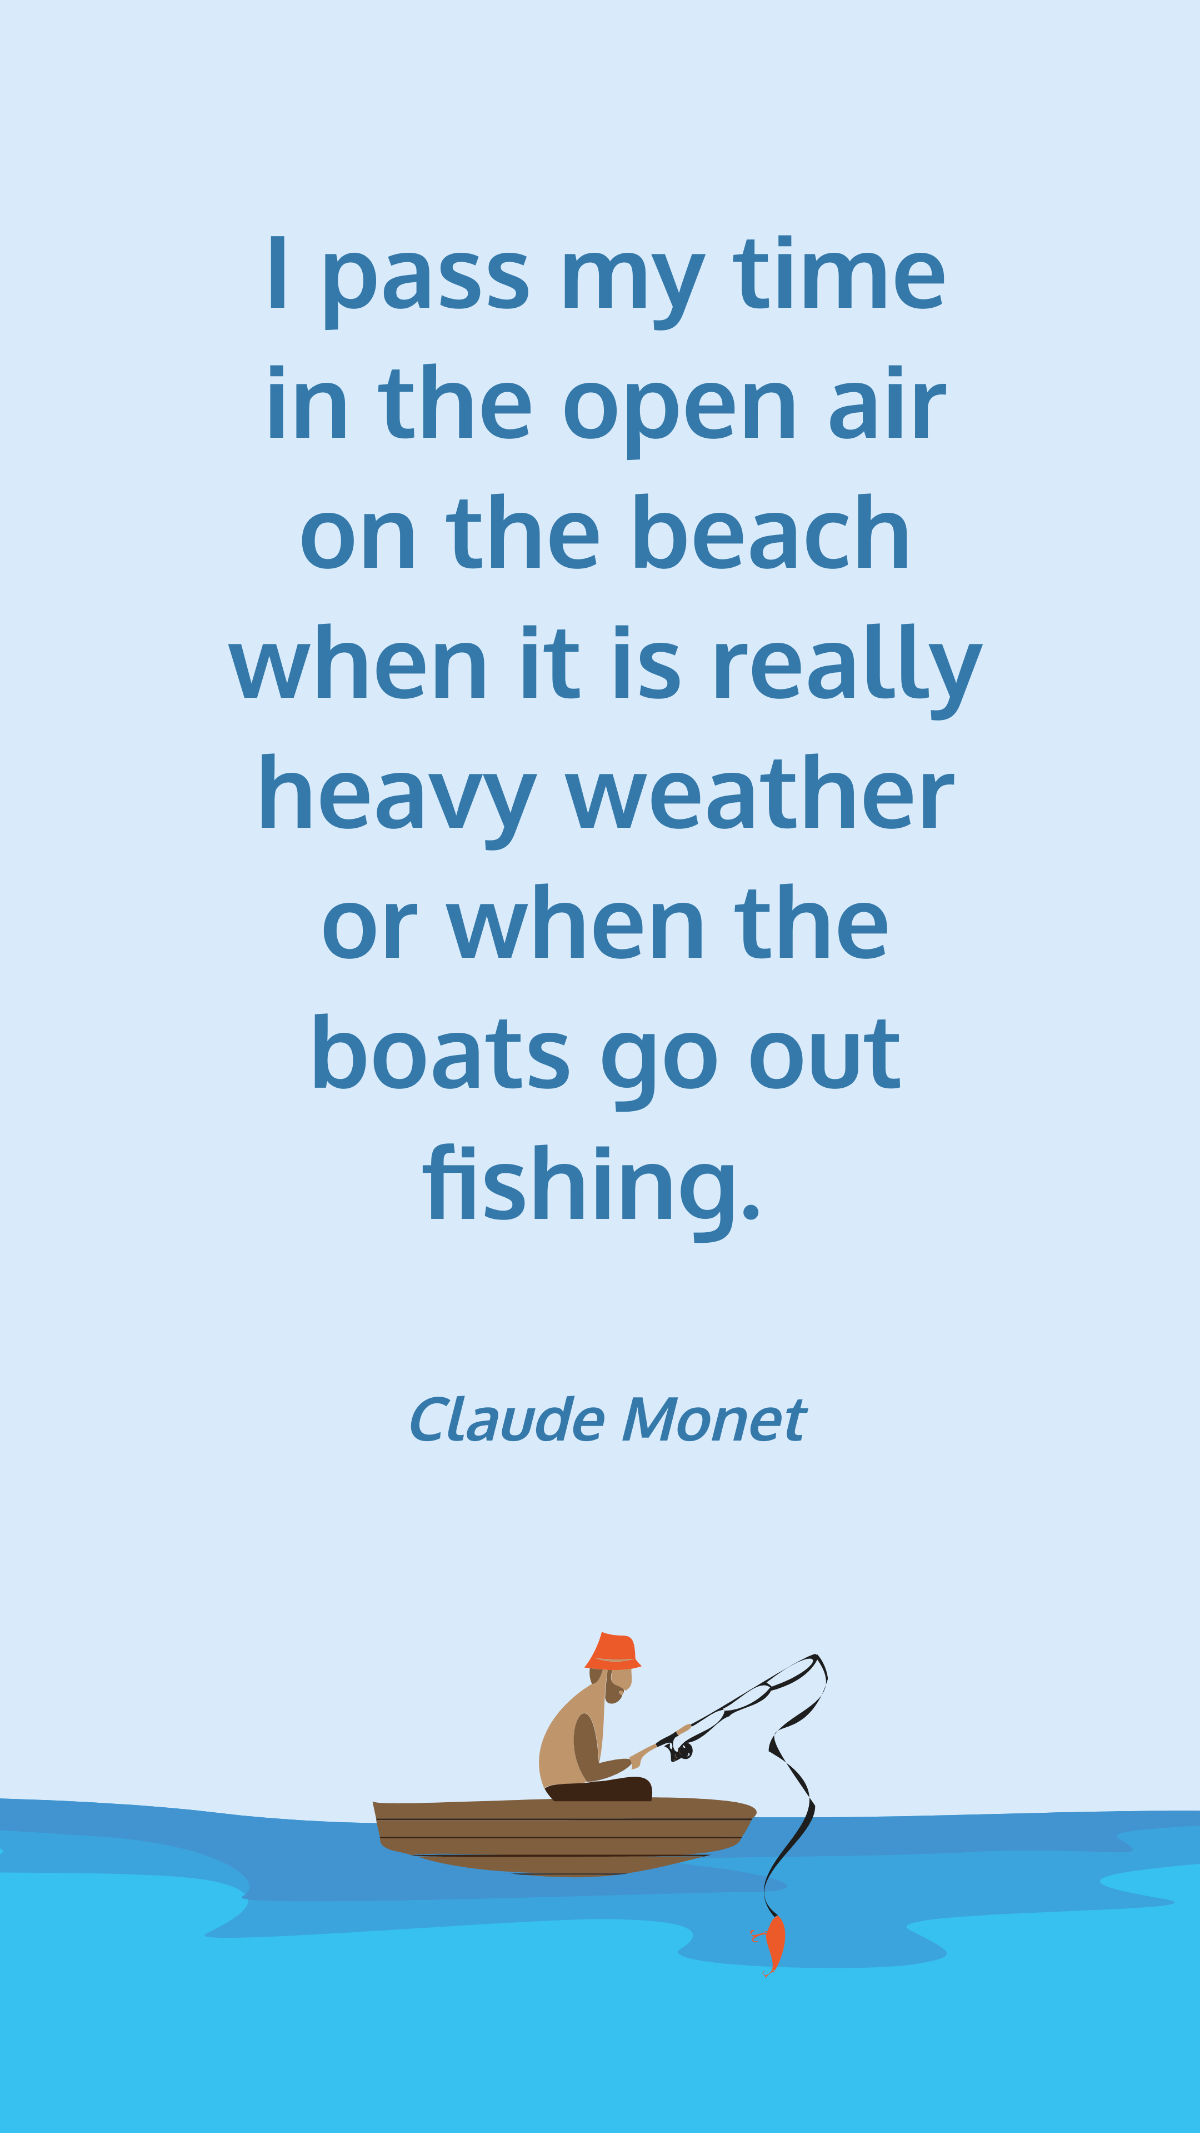 Free Claude Monet - I pass my time in the open air on the beach when it is really heavy weather or when the boats go out fishing. Template